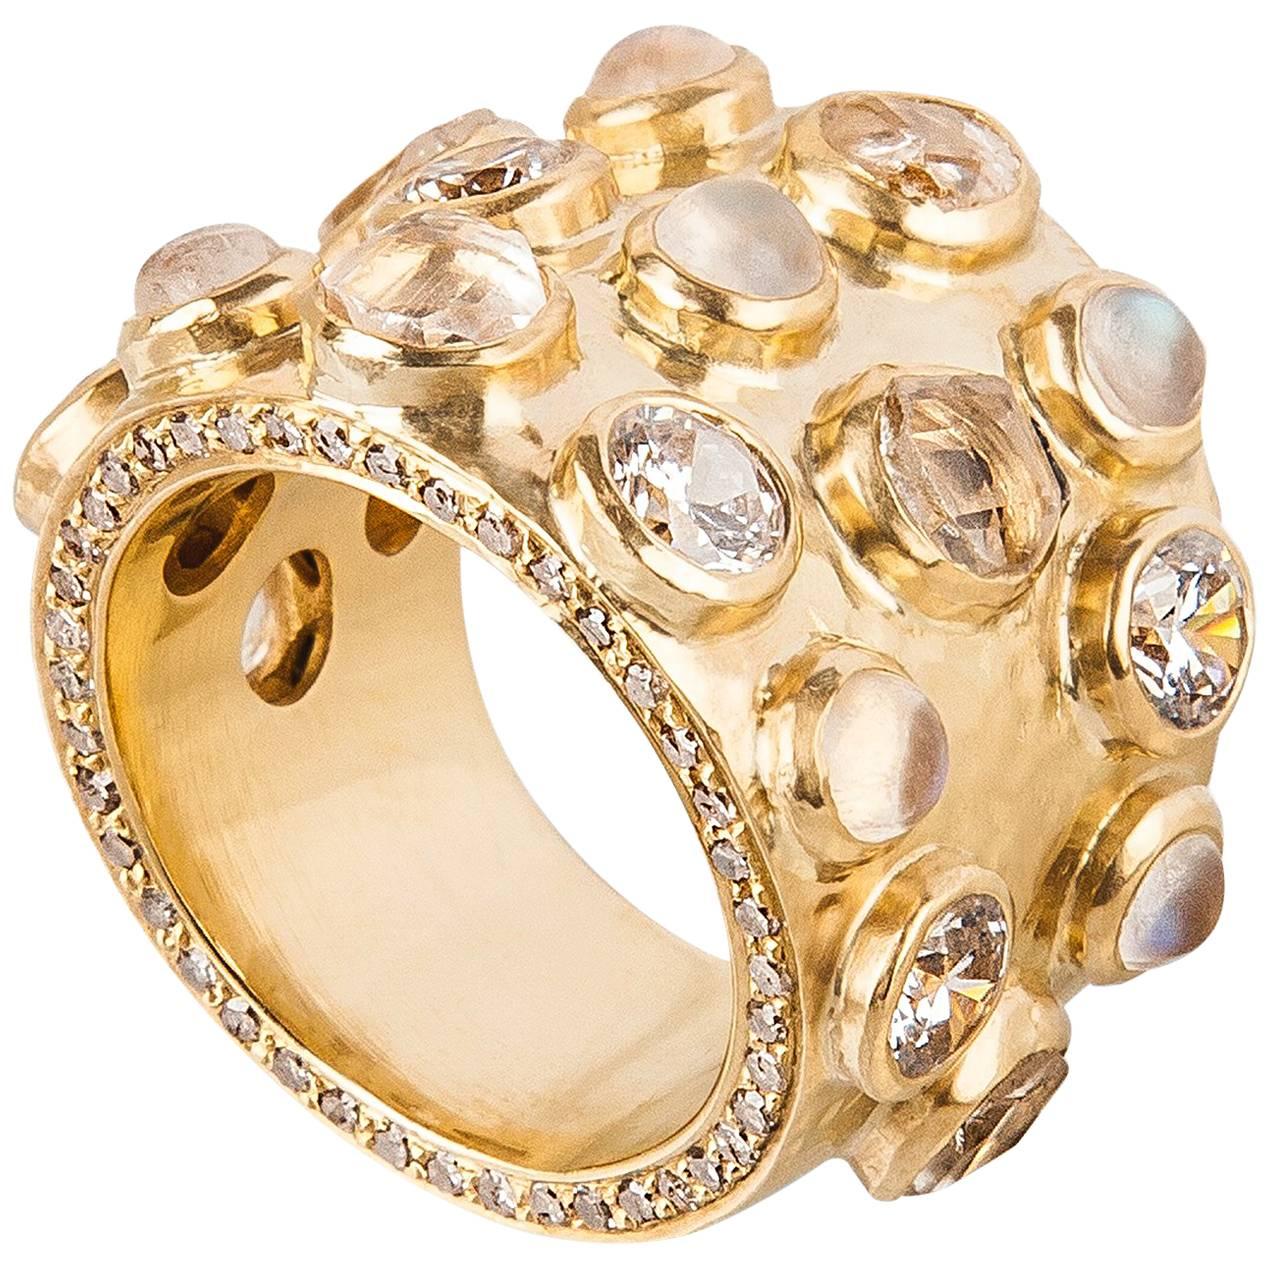 18 Karat Gold Cocktail Ring with Diamonds, Sapphires and Moonstones   For Sale